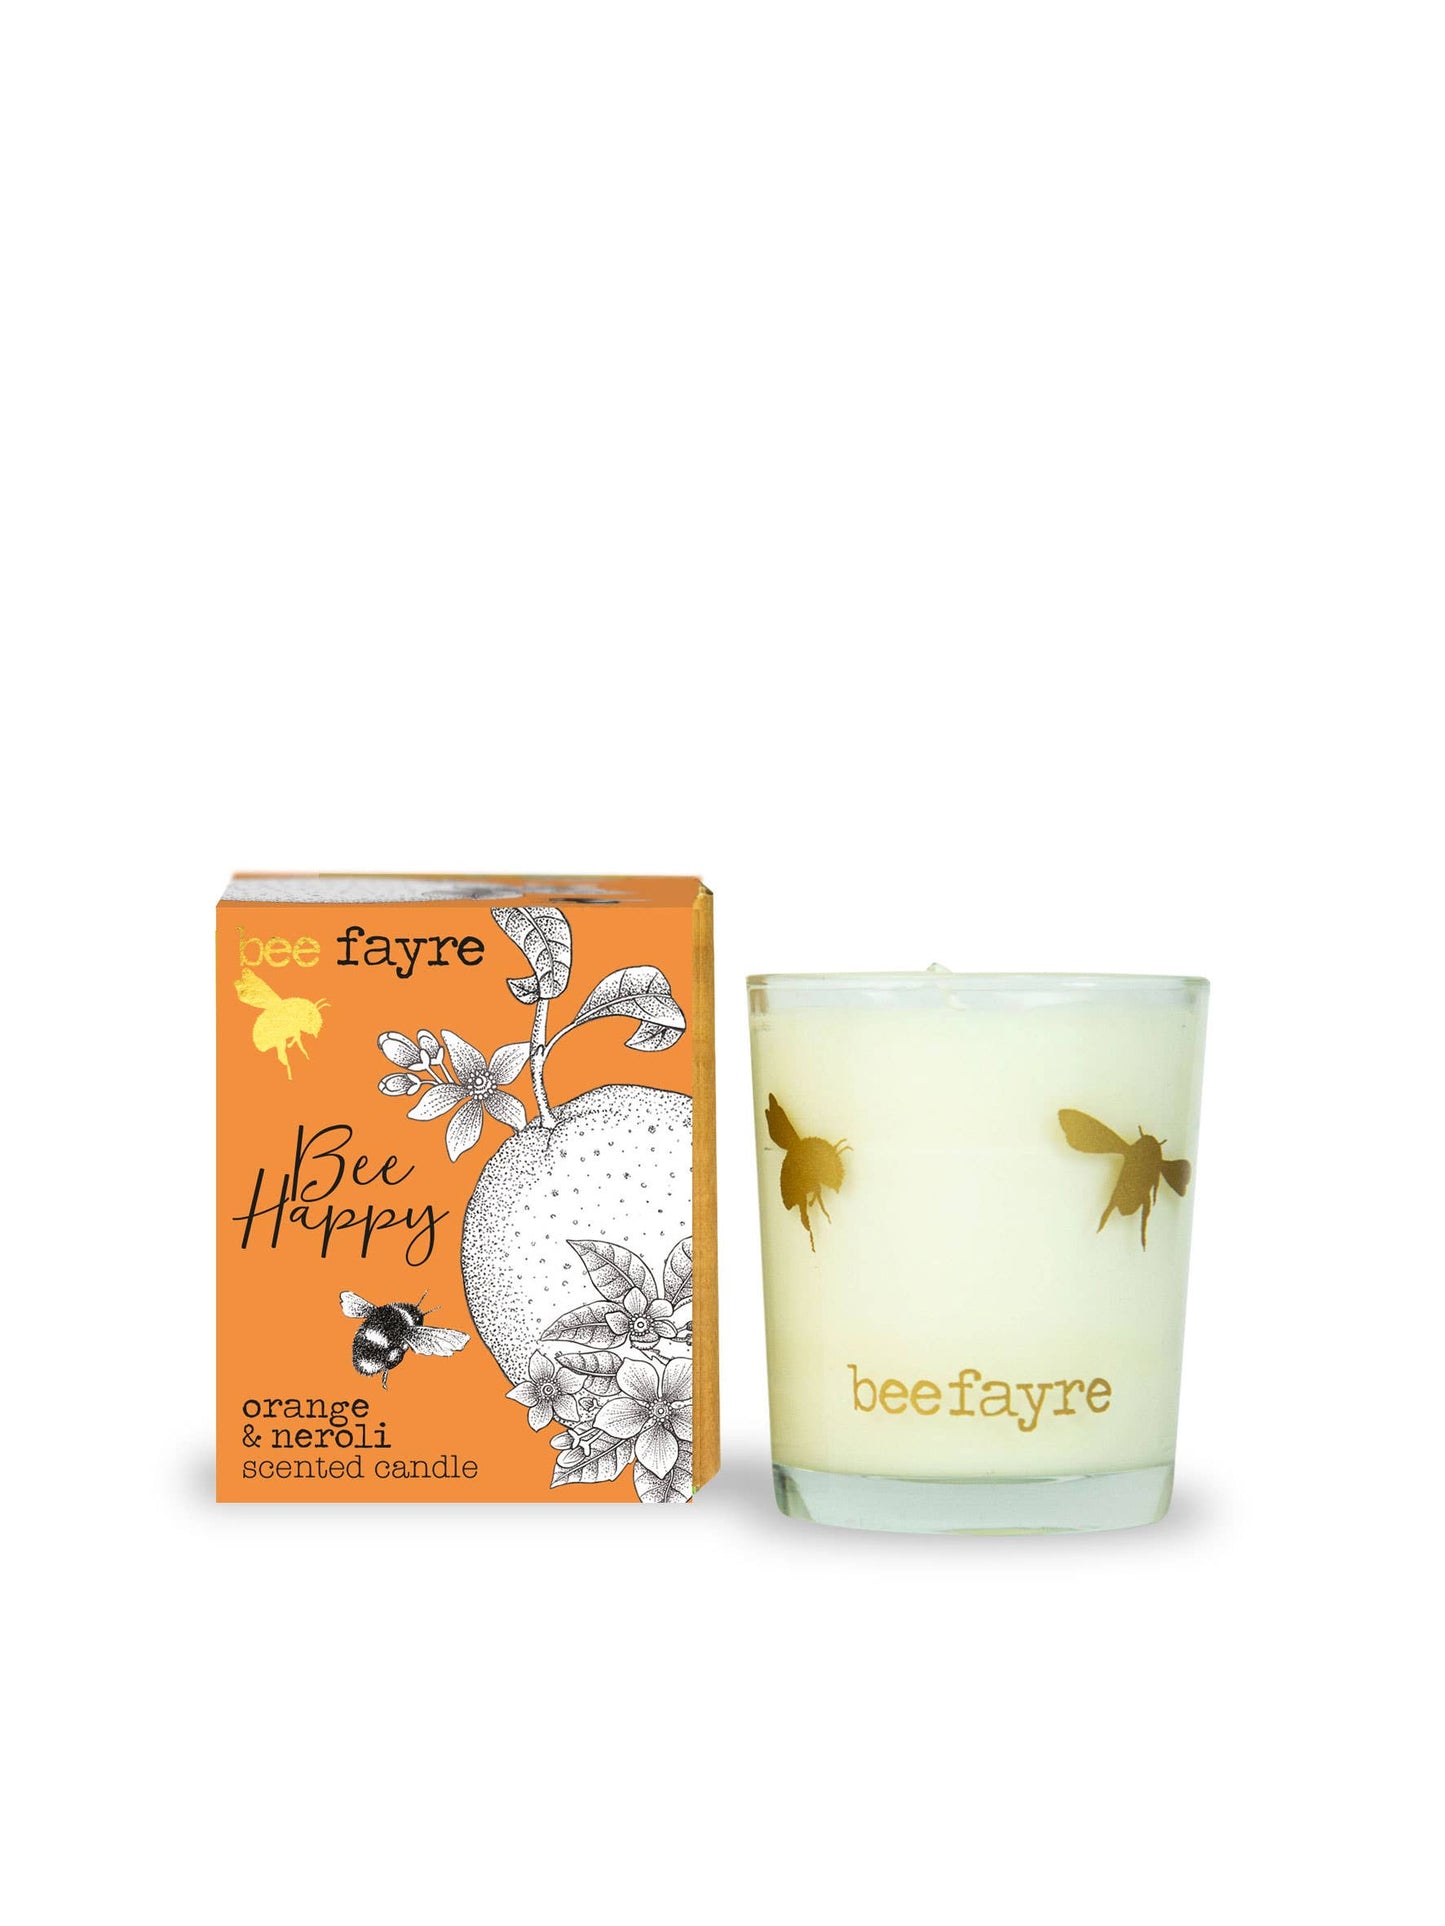 beefayre ltd - Bee Happy Small Scented Candle